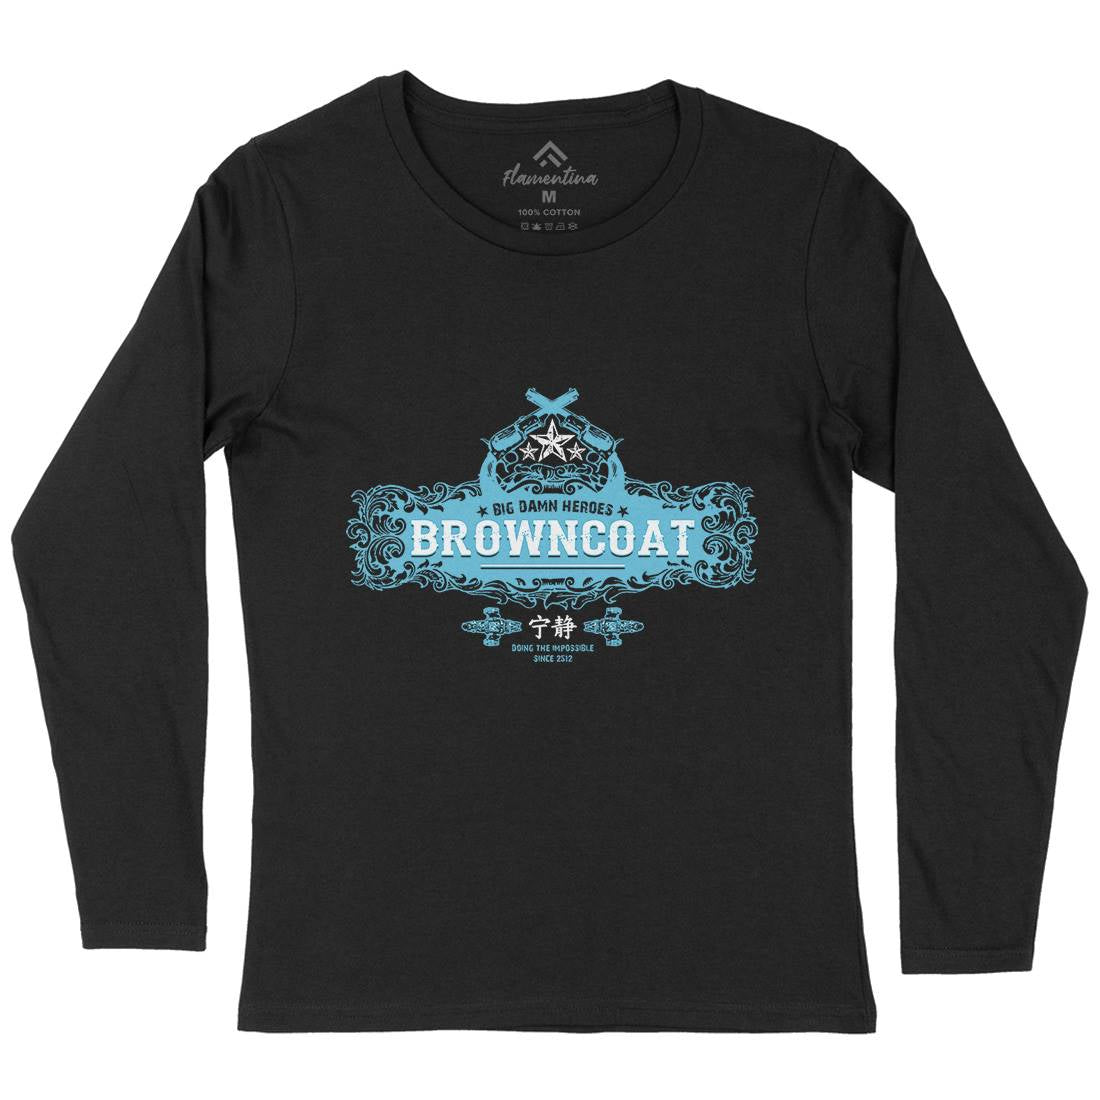 Browncoat Womens Long Sleeve T-Shirt Space D350